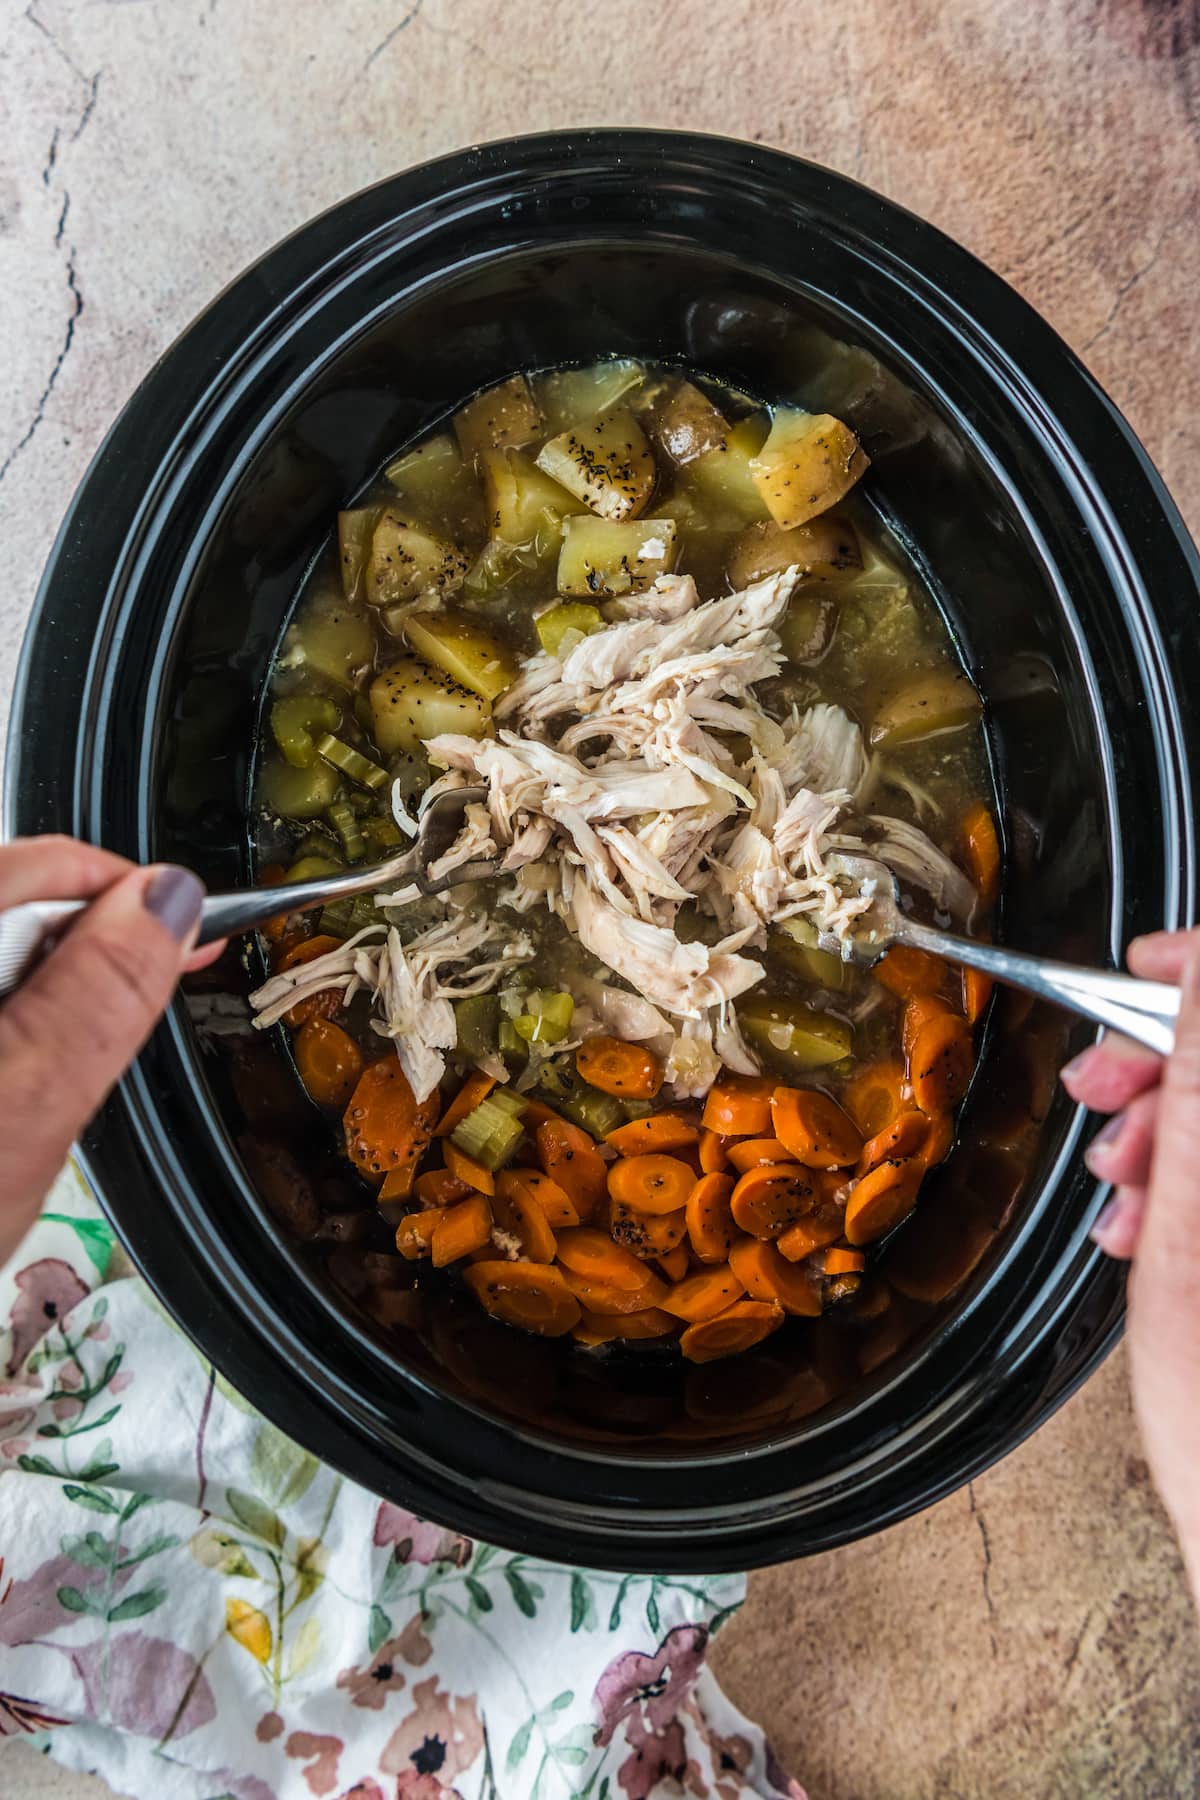 shredding chicken in a crockpot with broth, carrots, and potatoes